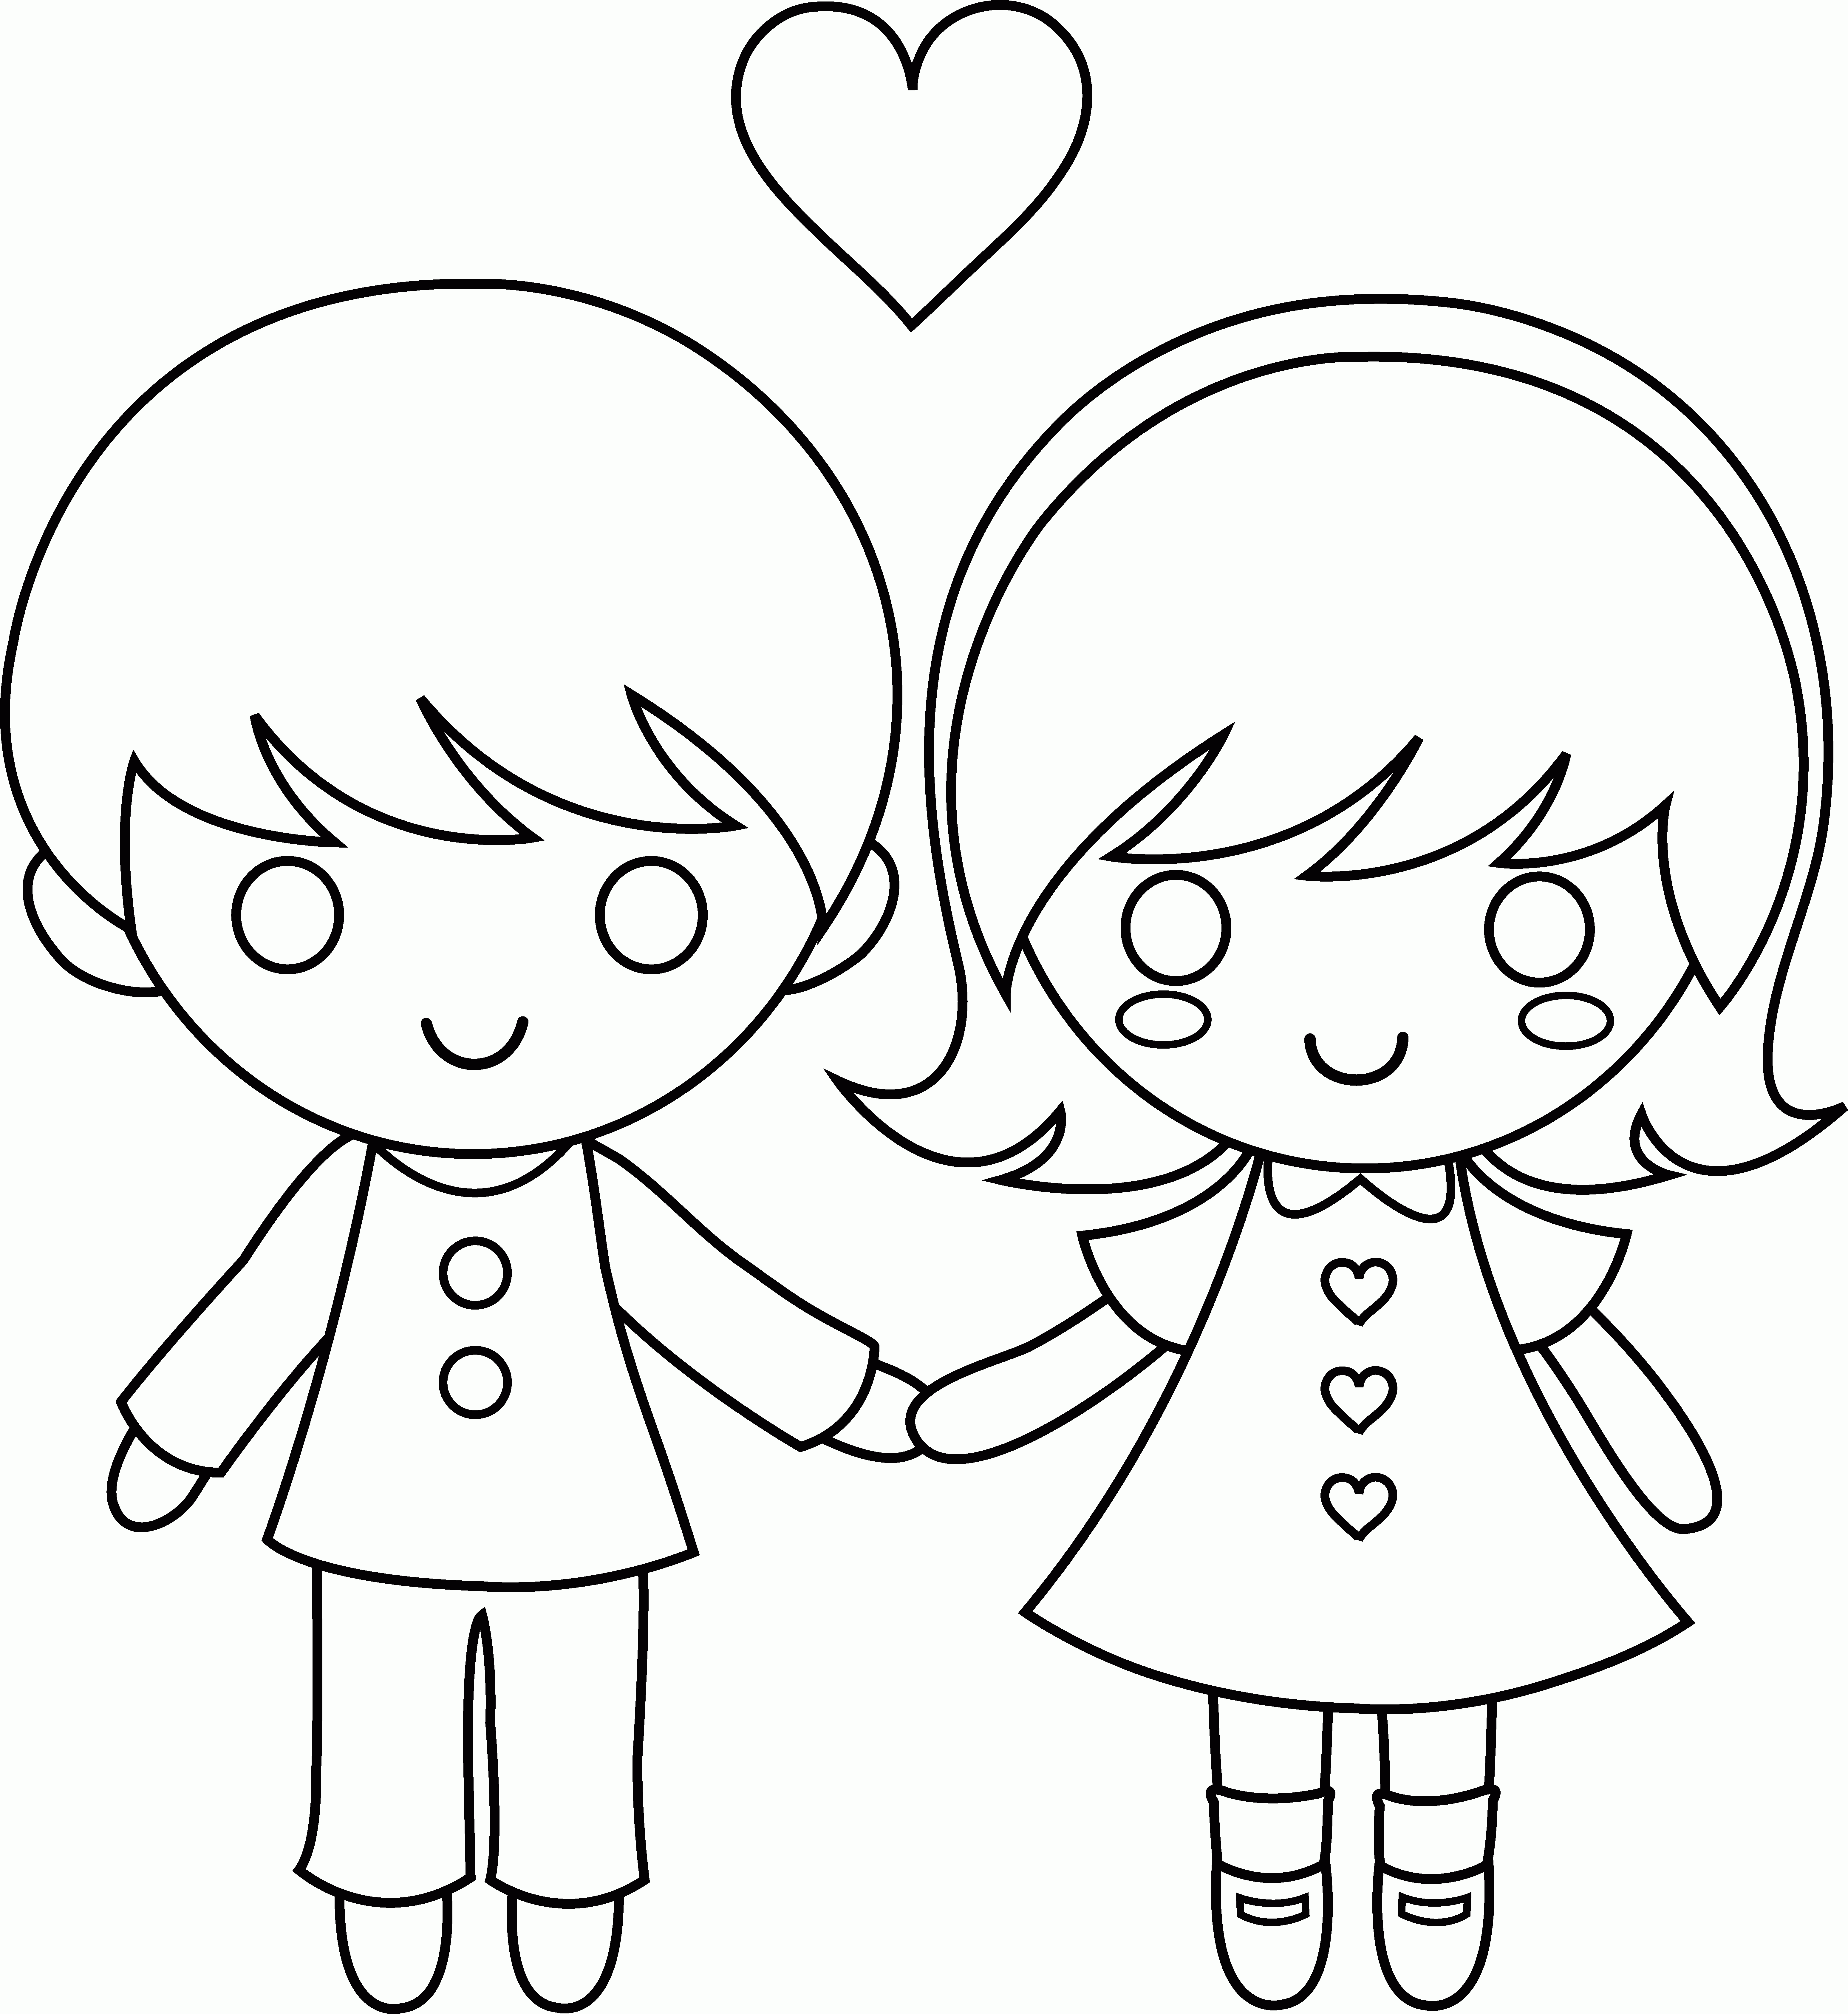 Free Girl And Boy Coloring Page, Download Free Girl And Boy ...